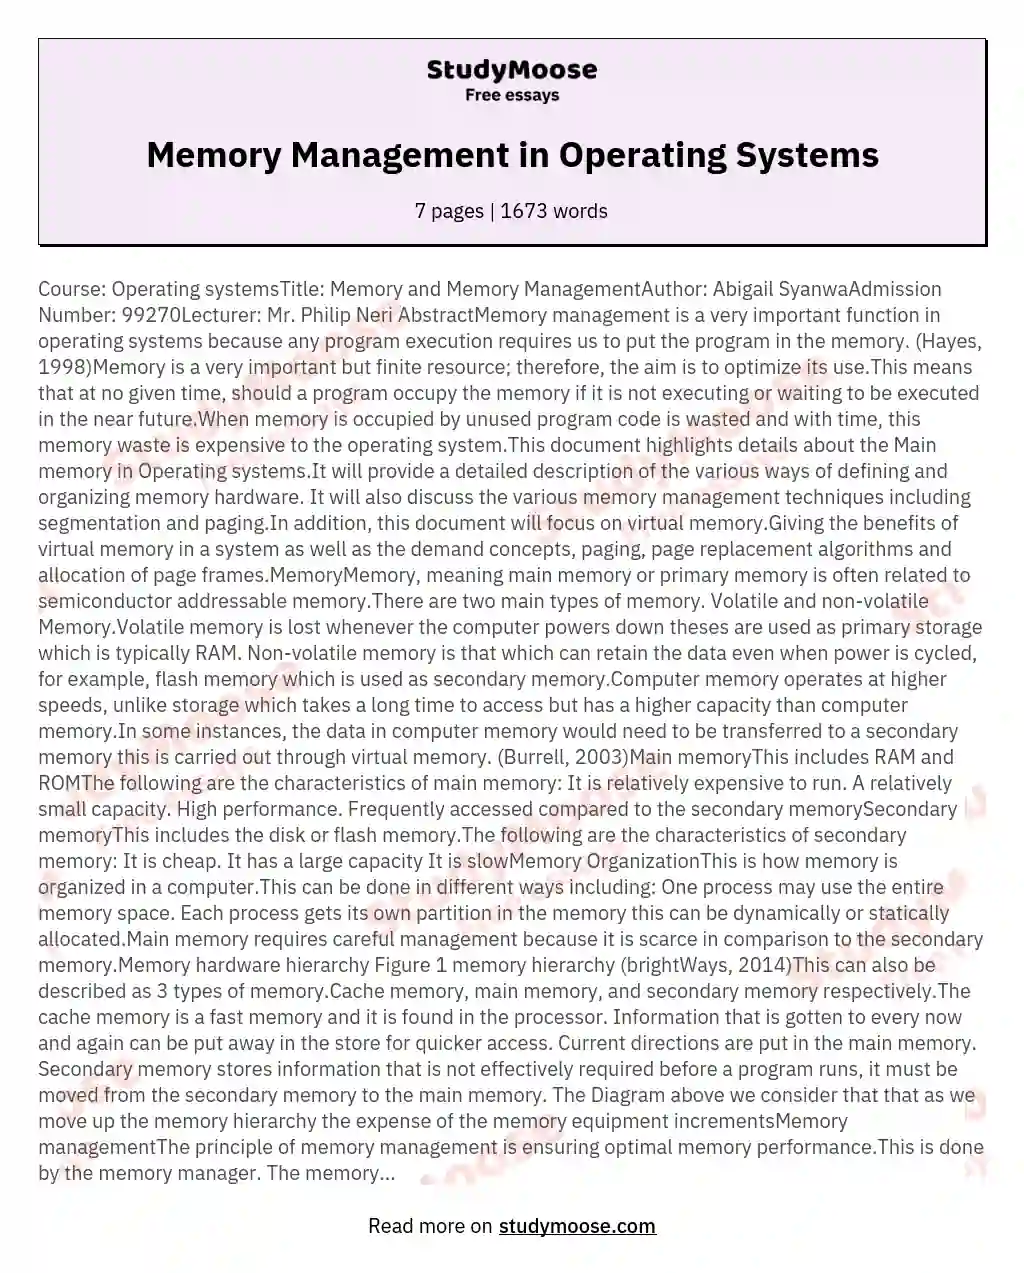 Memory Management in Operating Systems essay